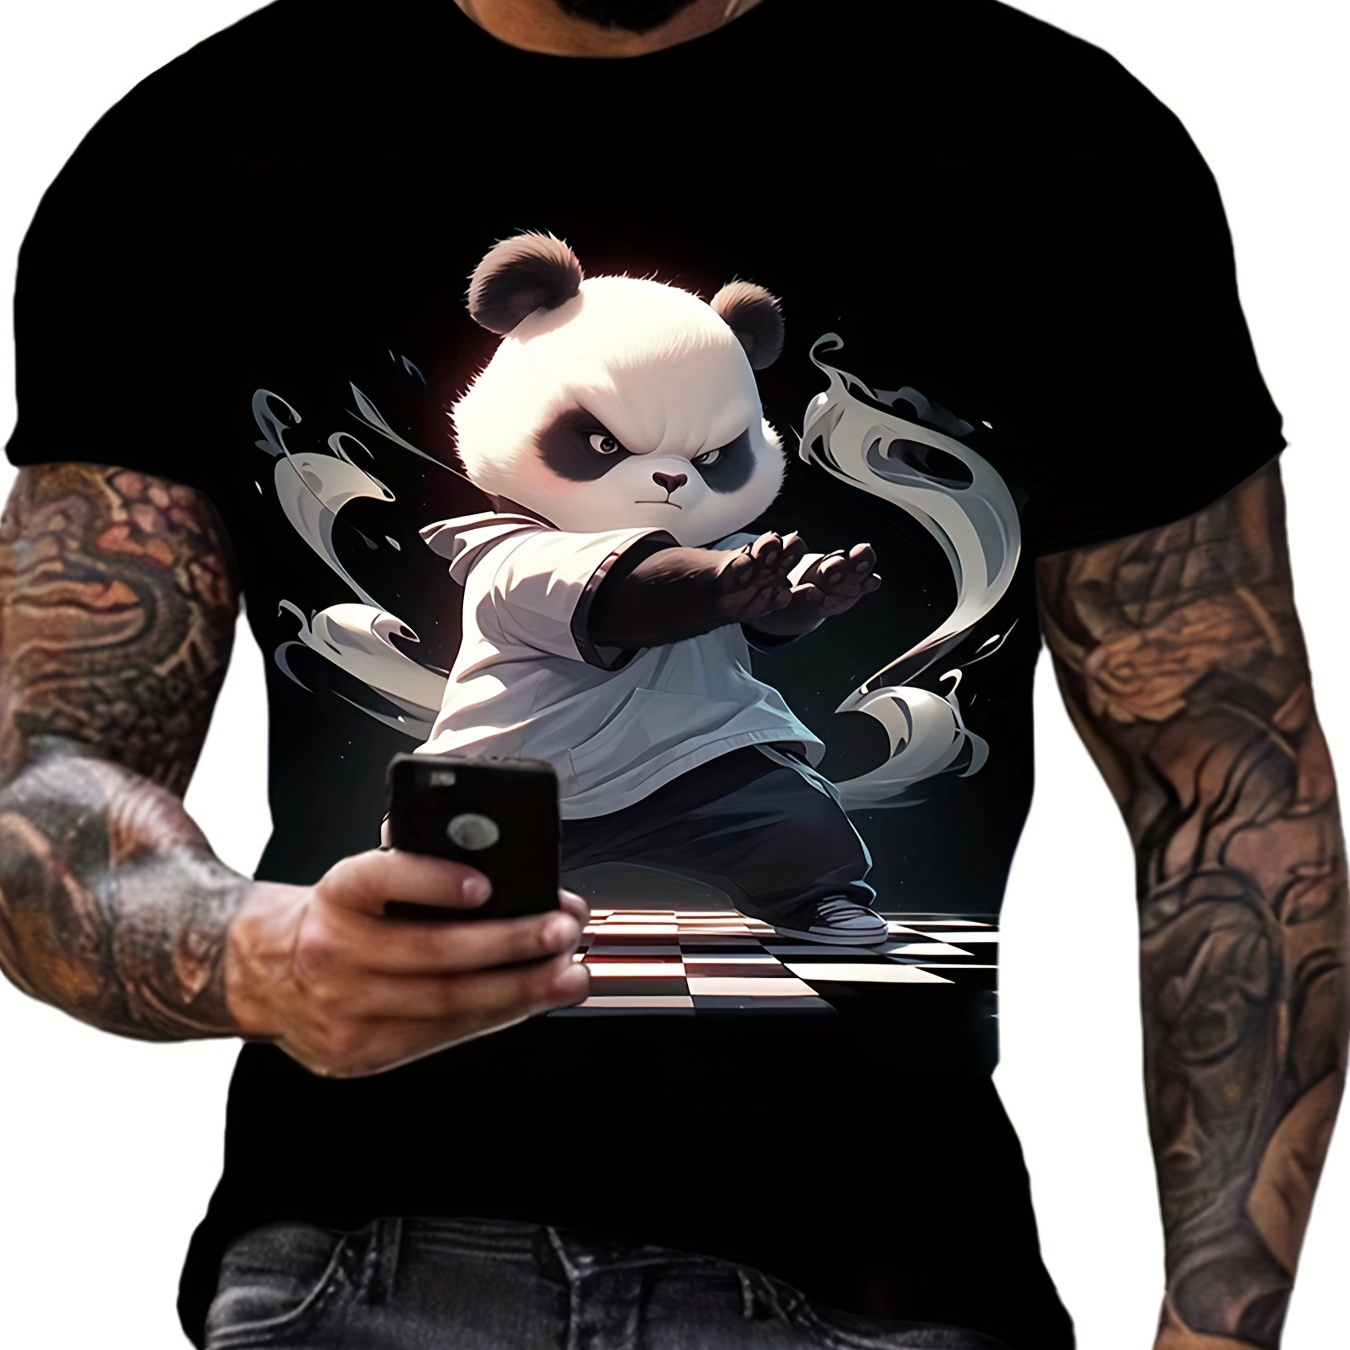 

3d Digital Cartoon Style Panda Pattern Crew Neck And Short Sleeve T-shirt, Stylish And Chic Tops For Men's Summer Street Wear